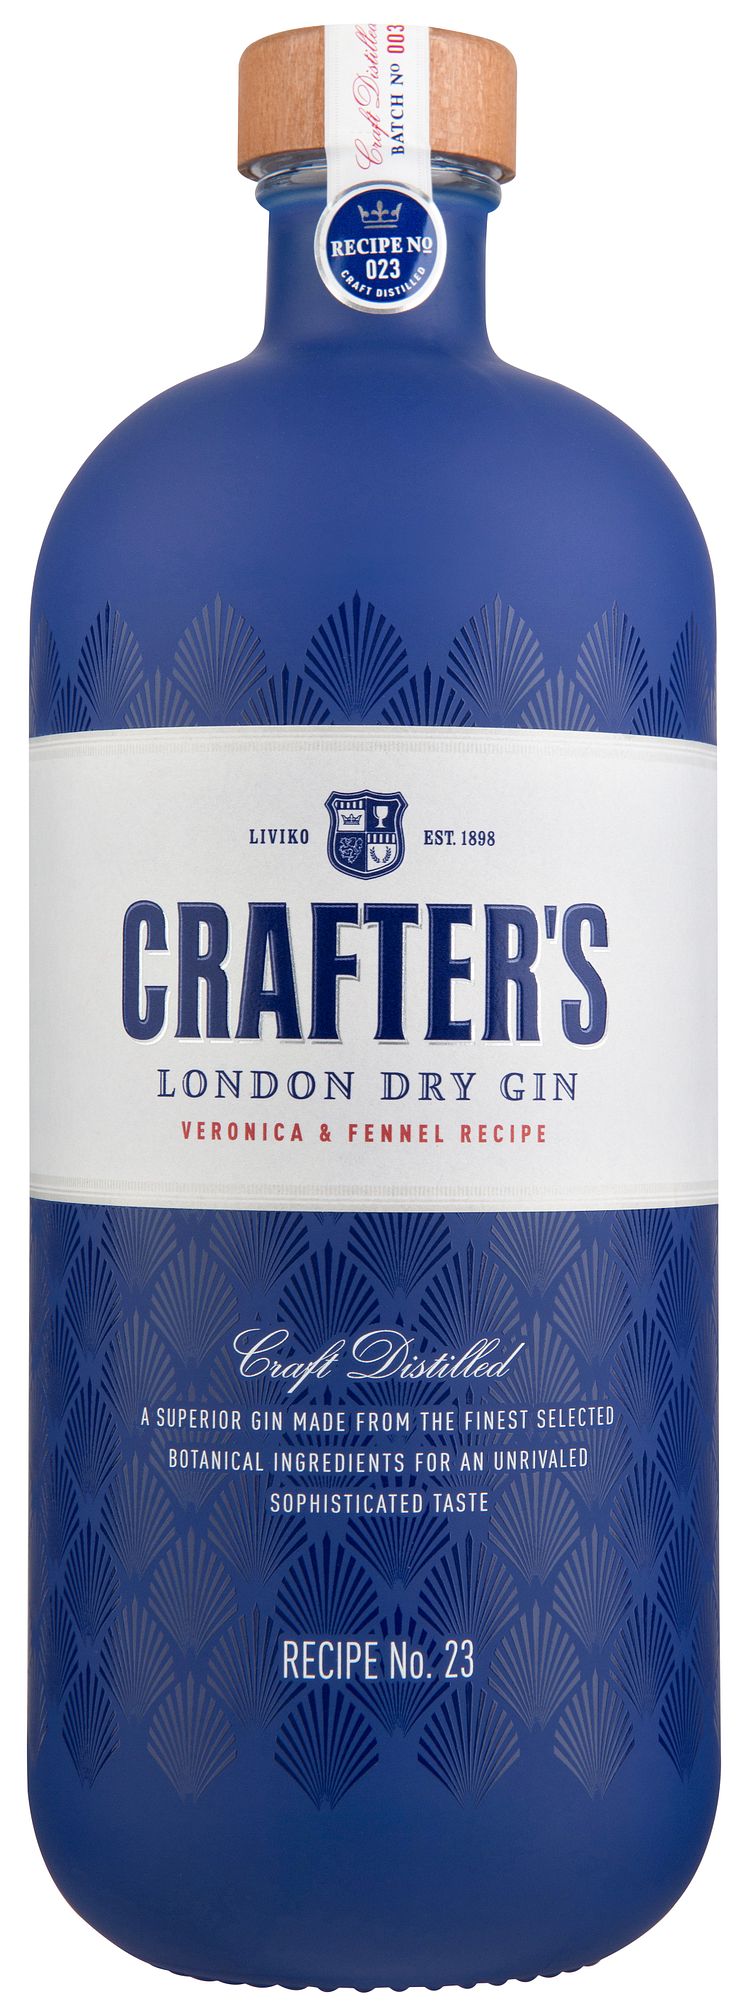 Crafter’s London Dry Gin 